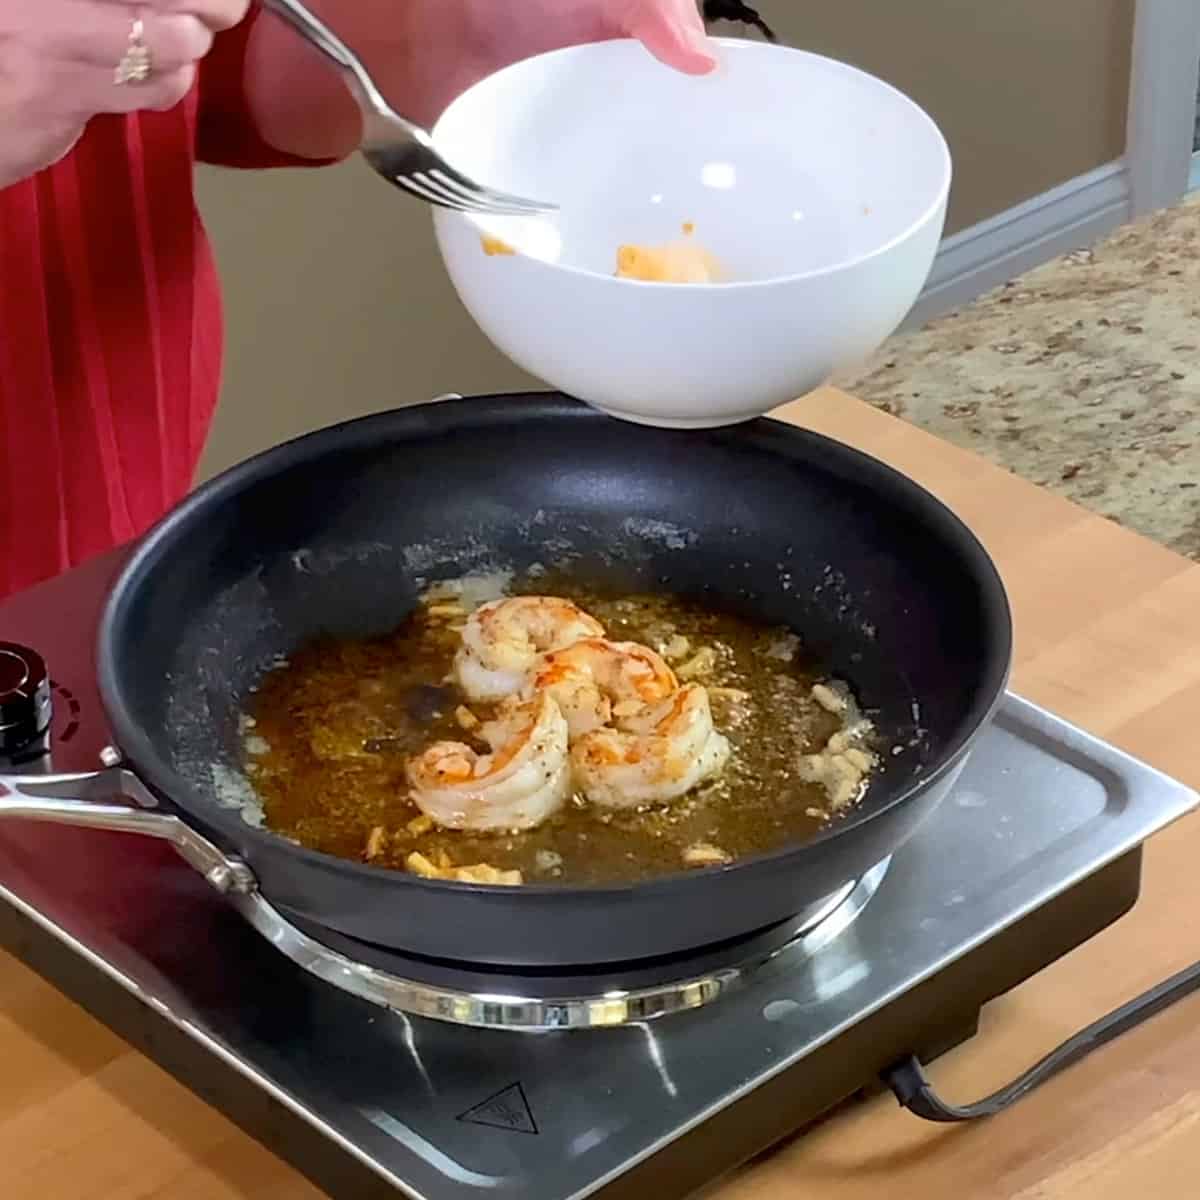 5 shrimp cooking in a pan